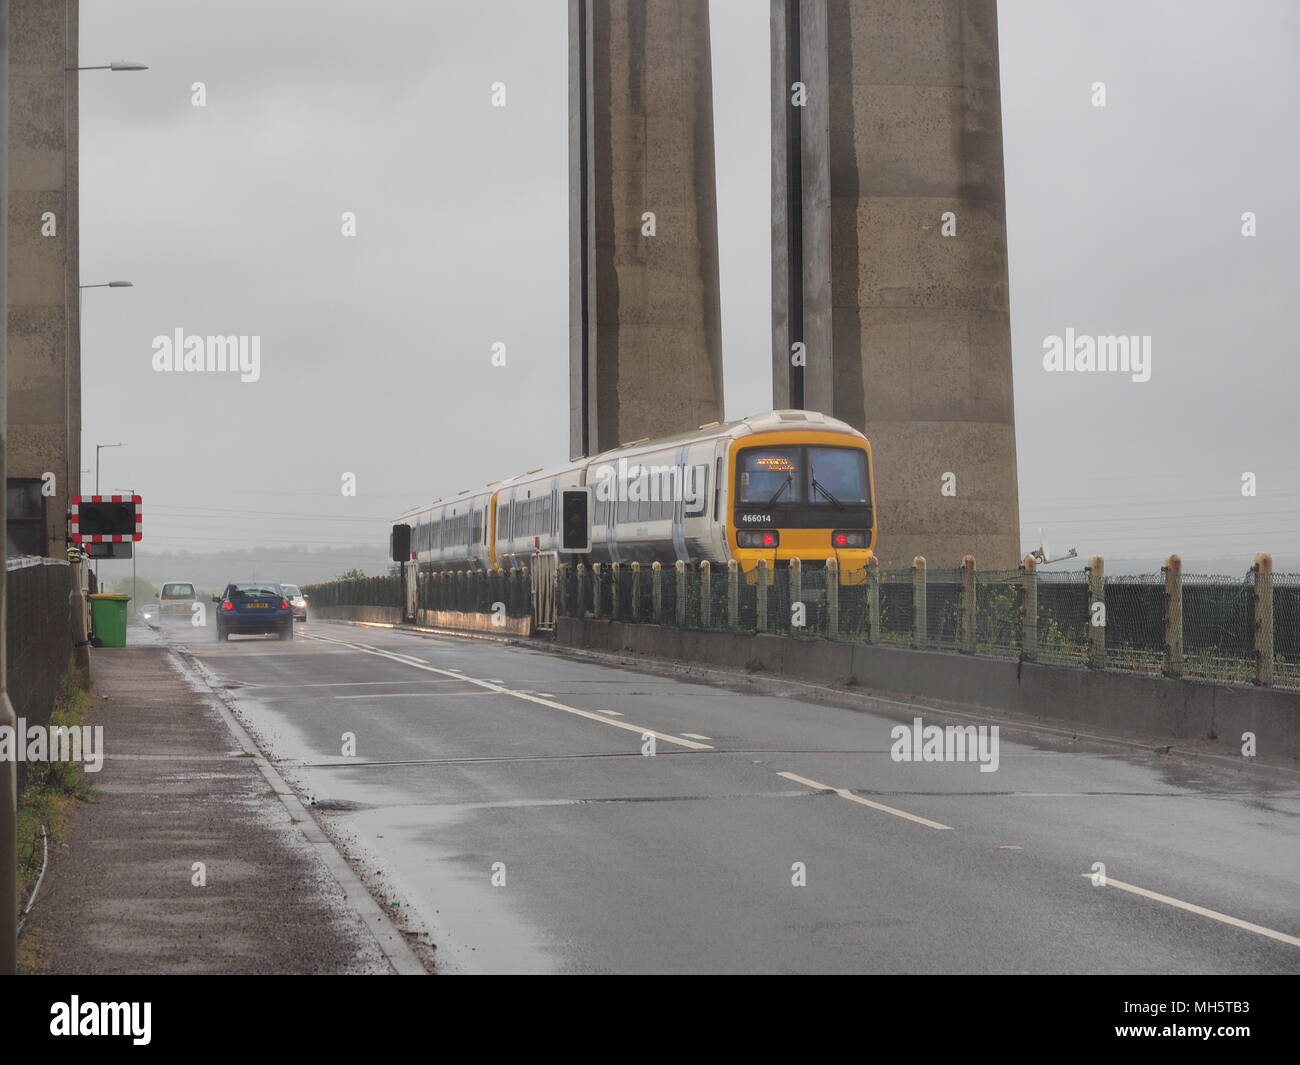 Sheppey Crossing, Isle of Sheppey, Kent, UK. 30th April, 2018. A man's body has been found early this morning, after police were called to an abandoned car on the northbound carriageway of the Sheppey Crossing. Officers arrived at 2.55am. The body was found in the Swale at 4.44am. The death is not being treated as suspicious. (Photos taken 9am this morning in awful weather). A train crossing the Kingsferry Bridge. Credit: James Bell/Alamy Live News Stock Photo